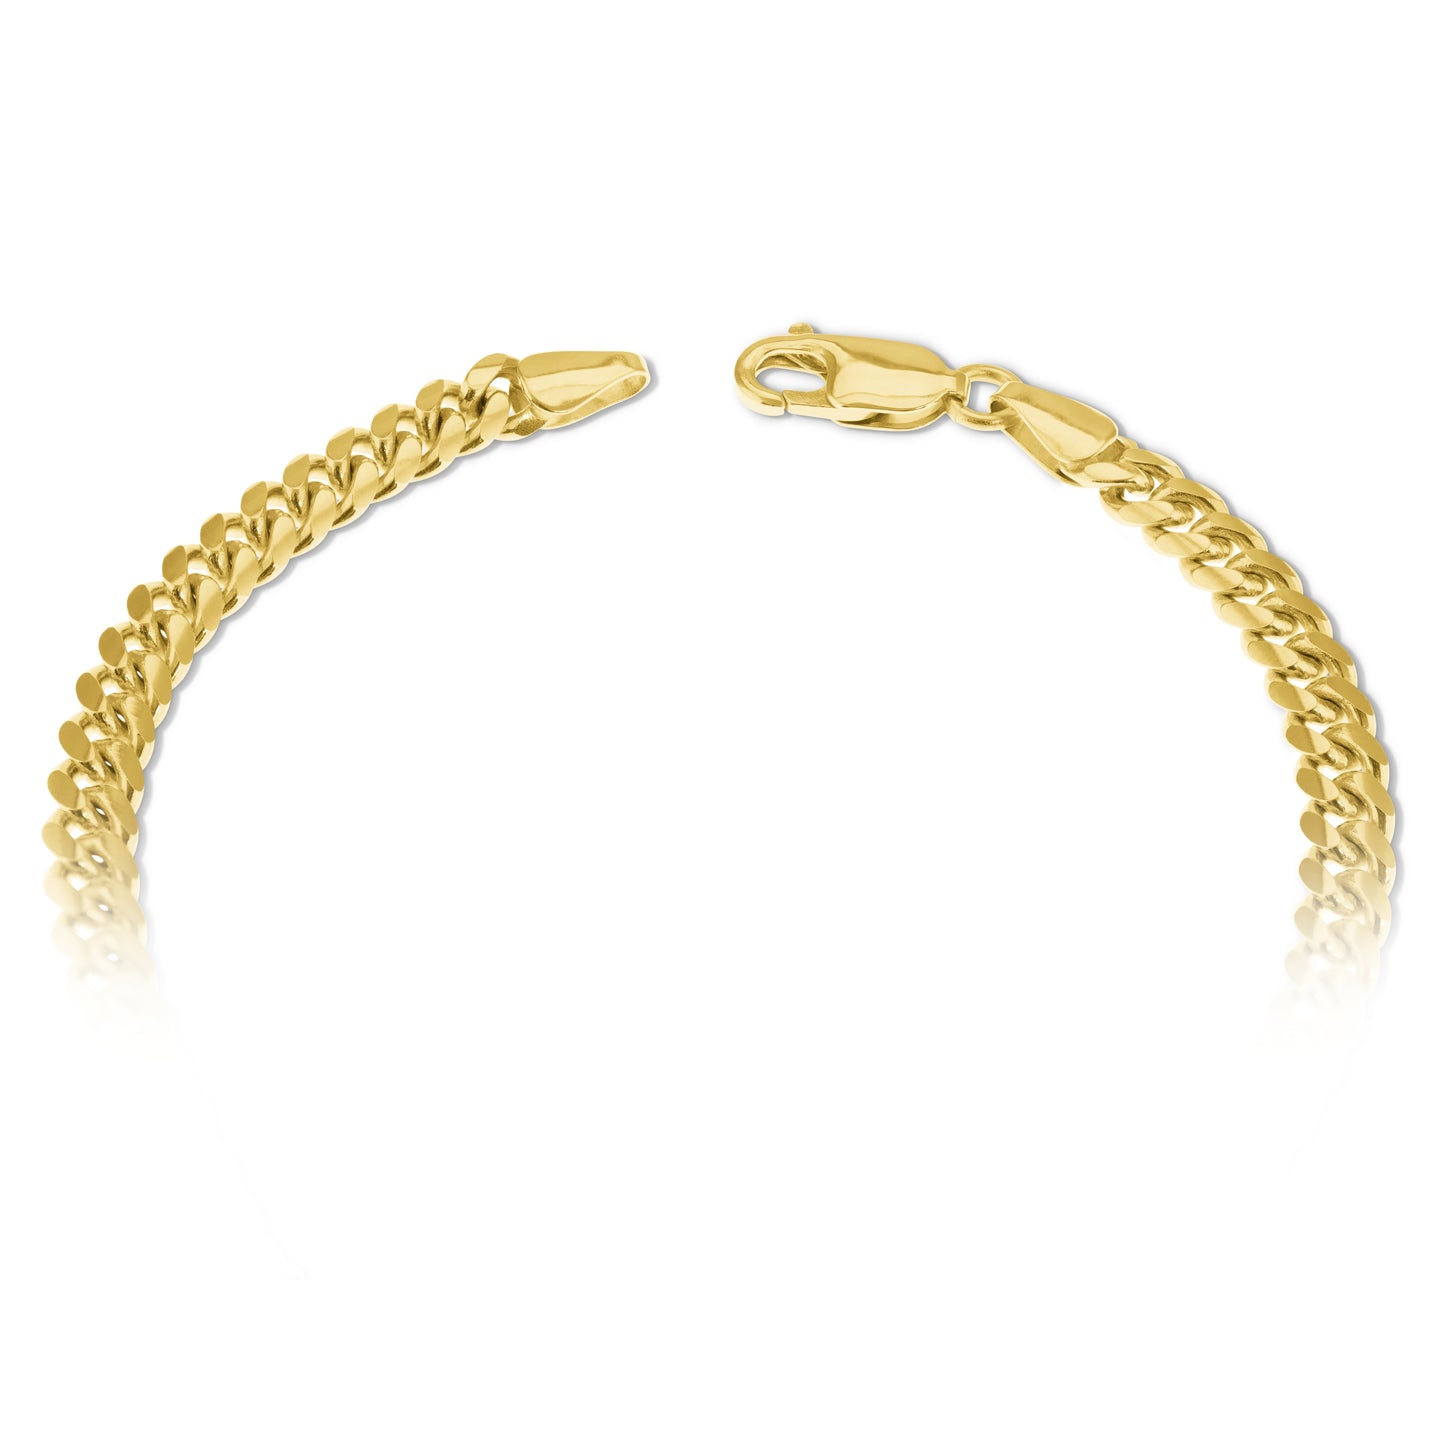 10K Yellow Gold Lobster Clasp Cuban Link Chain 2Mm 20In 3.1Dwt / 4.8 G